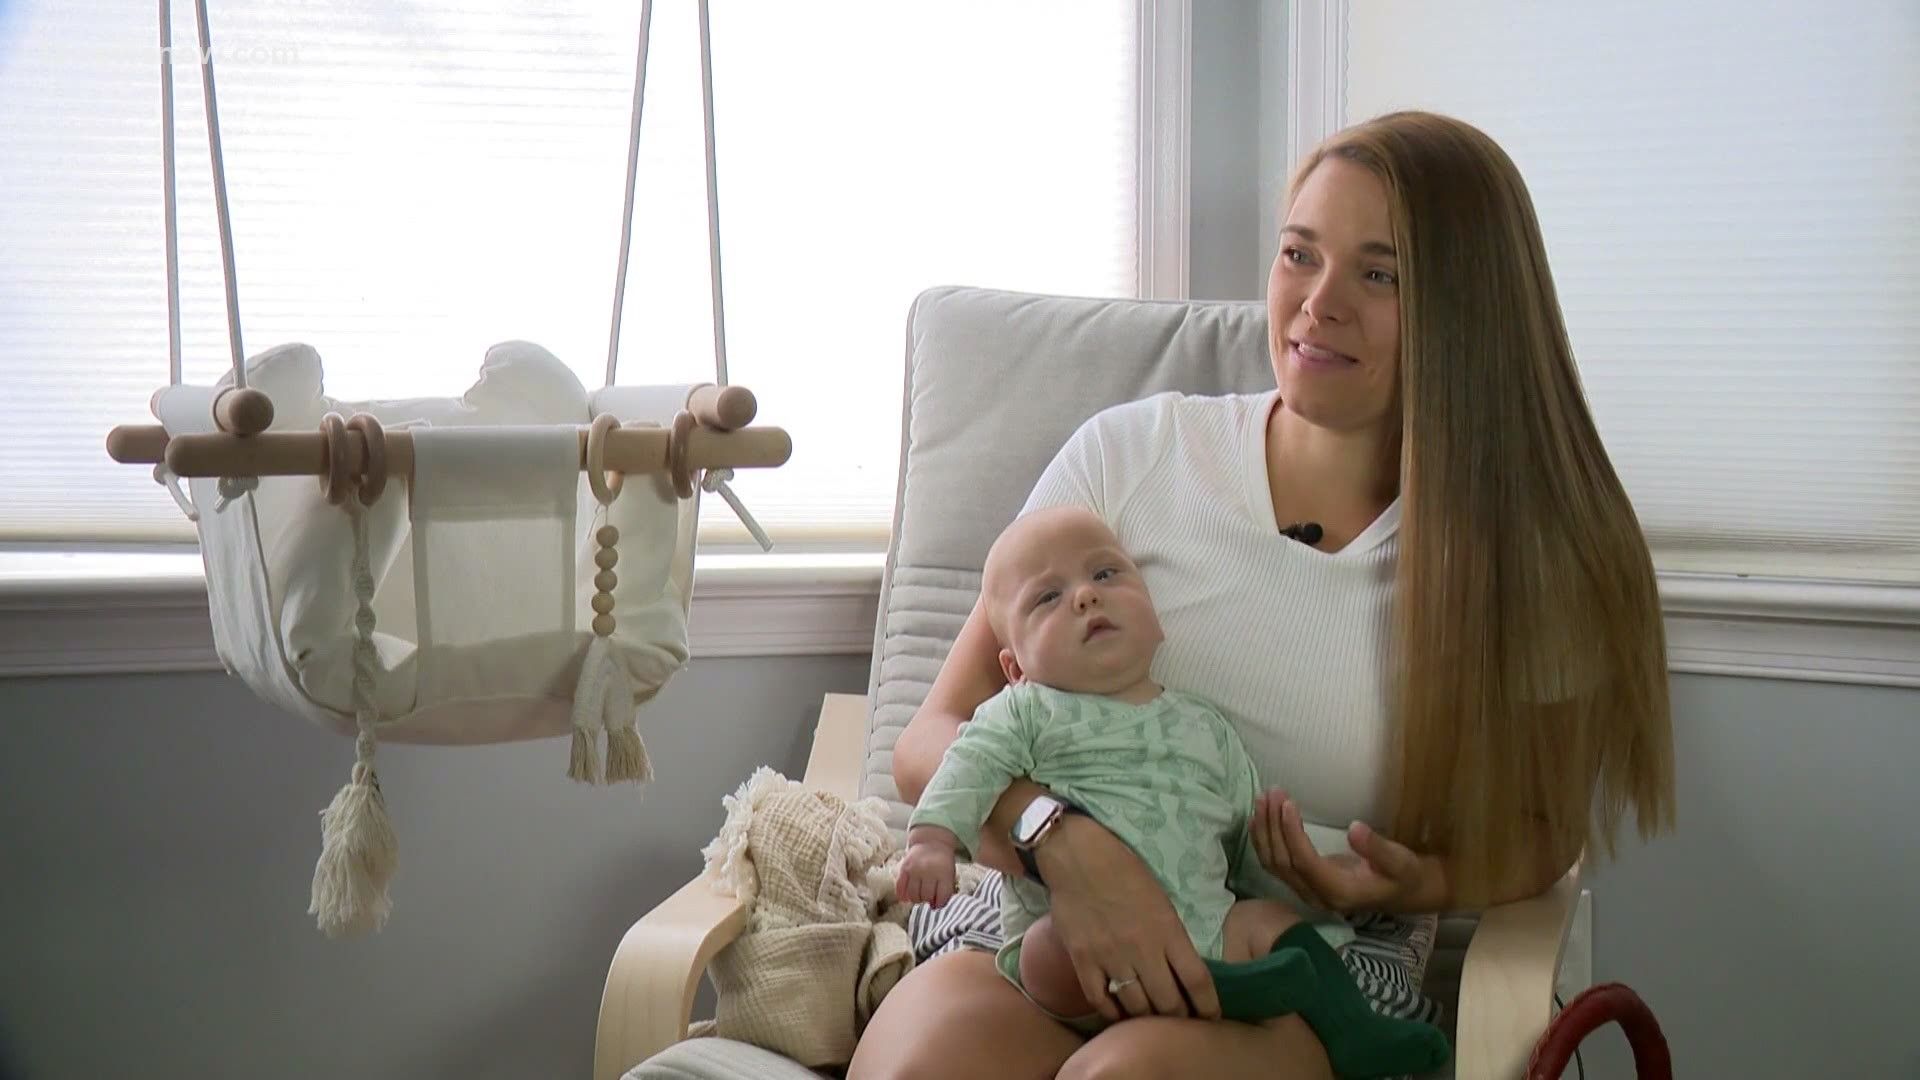 COVID-19 put life on hold this past year, but a Virginia Beach mom refused to let the virus stop her from giving life-changing breast milk donations.